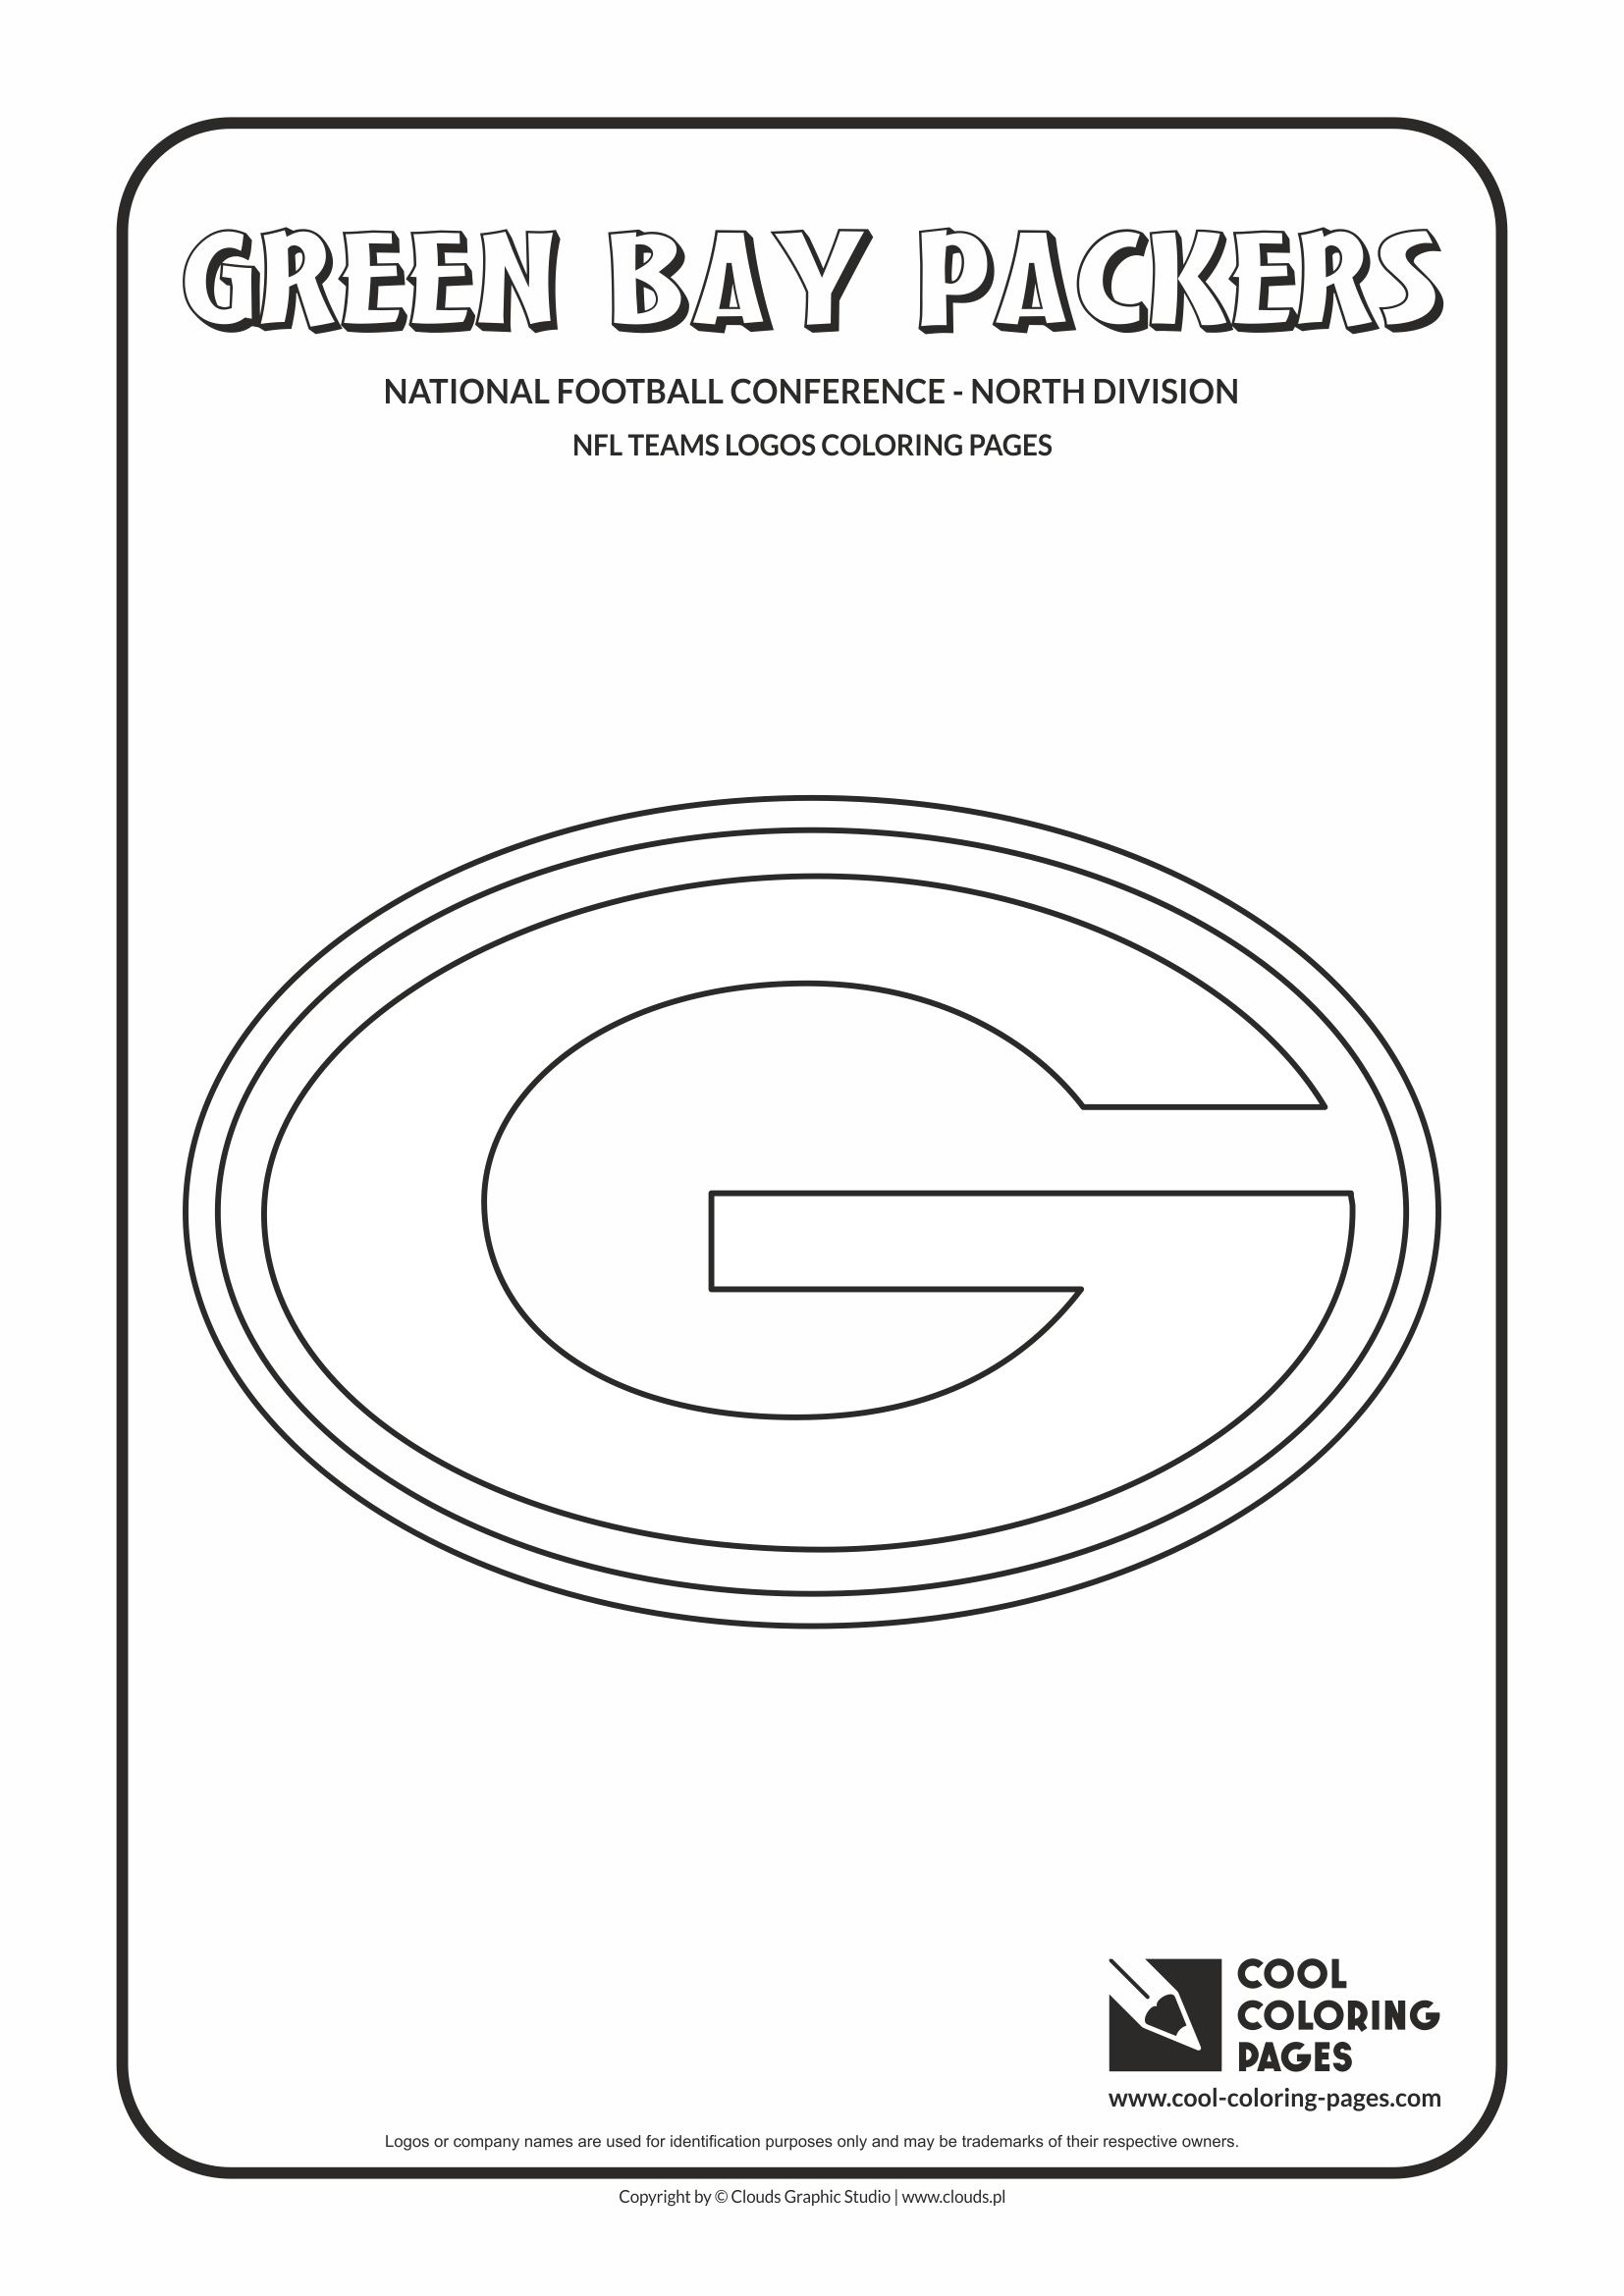 Cool Coloring Pages Green Bay Packers - Nfl American Football Teams - Free Printable Green Bay Packers Logo